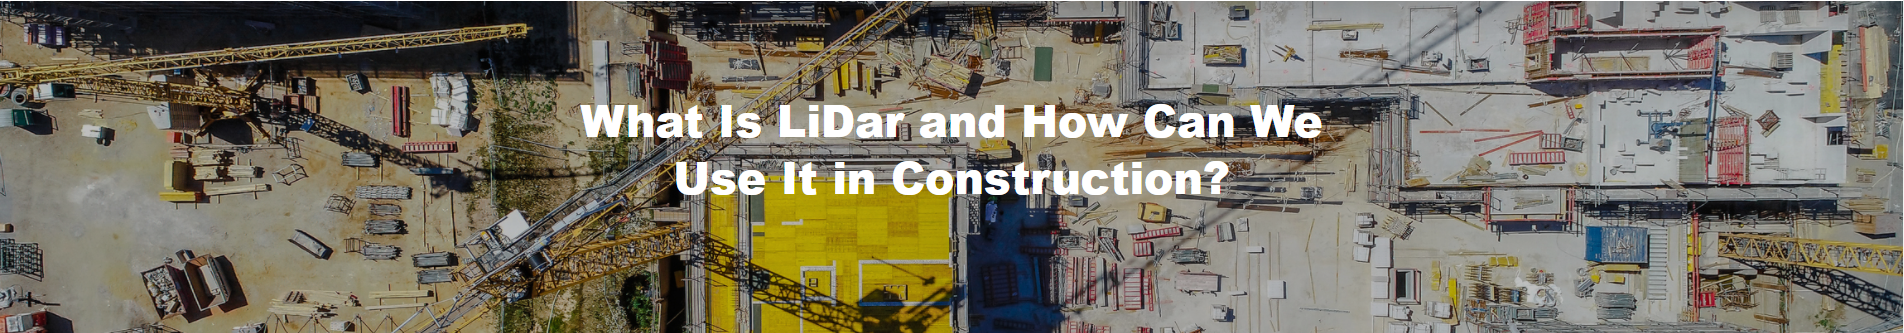 What Is LiDar and How Can We Use It in Construction?